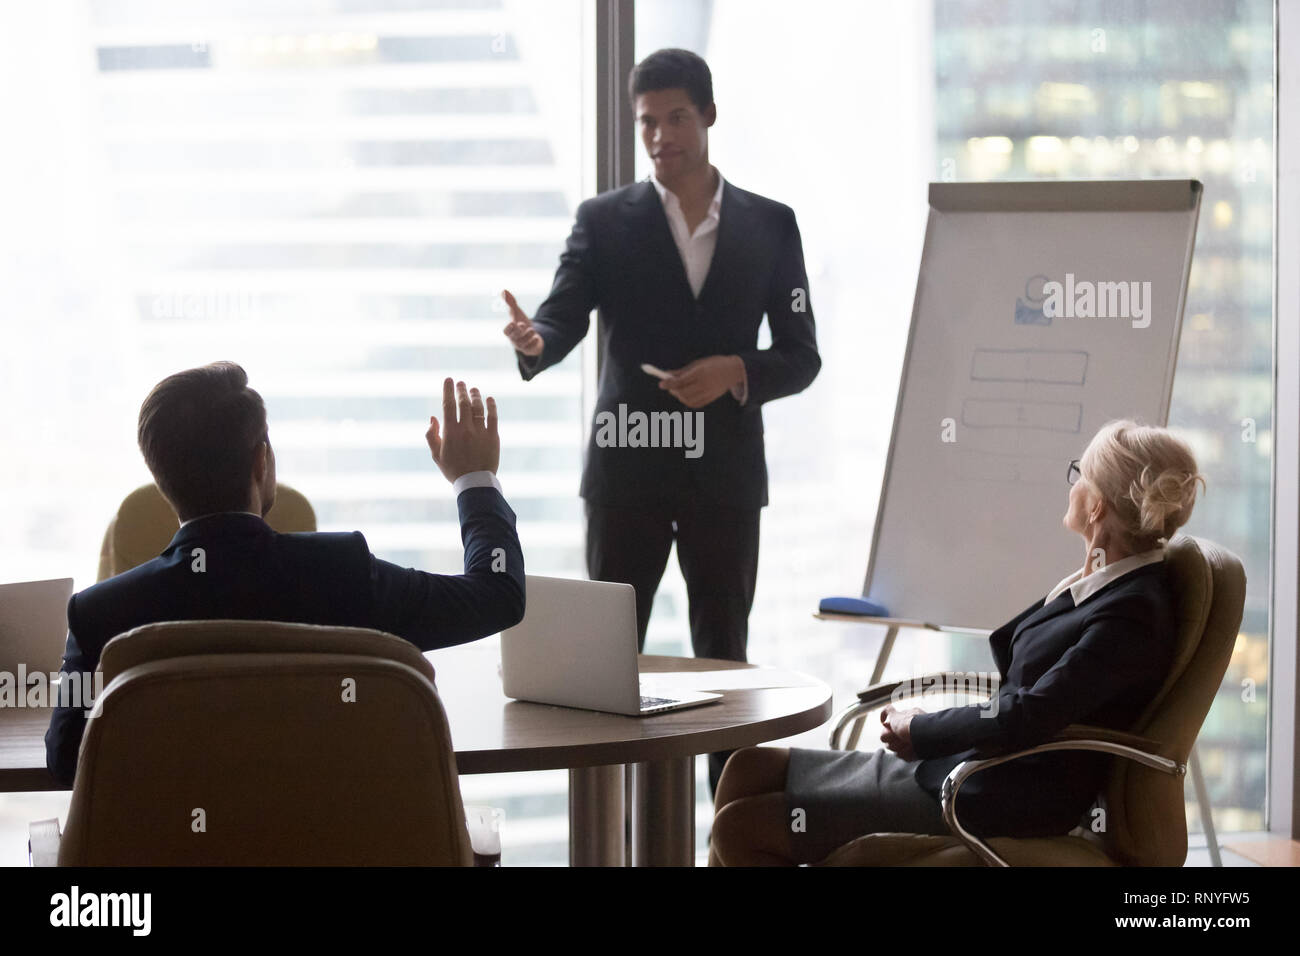 Businessman raising hand at corporate training ask questions african coach  Stock Photo